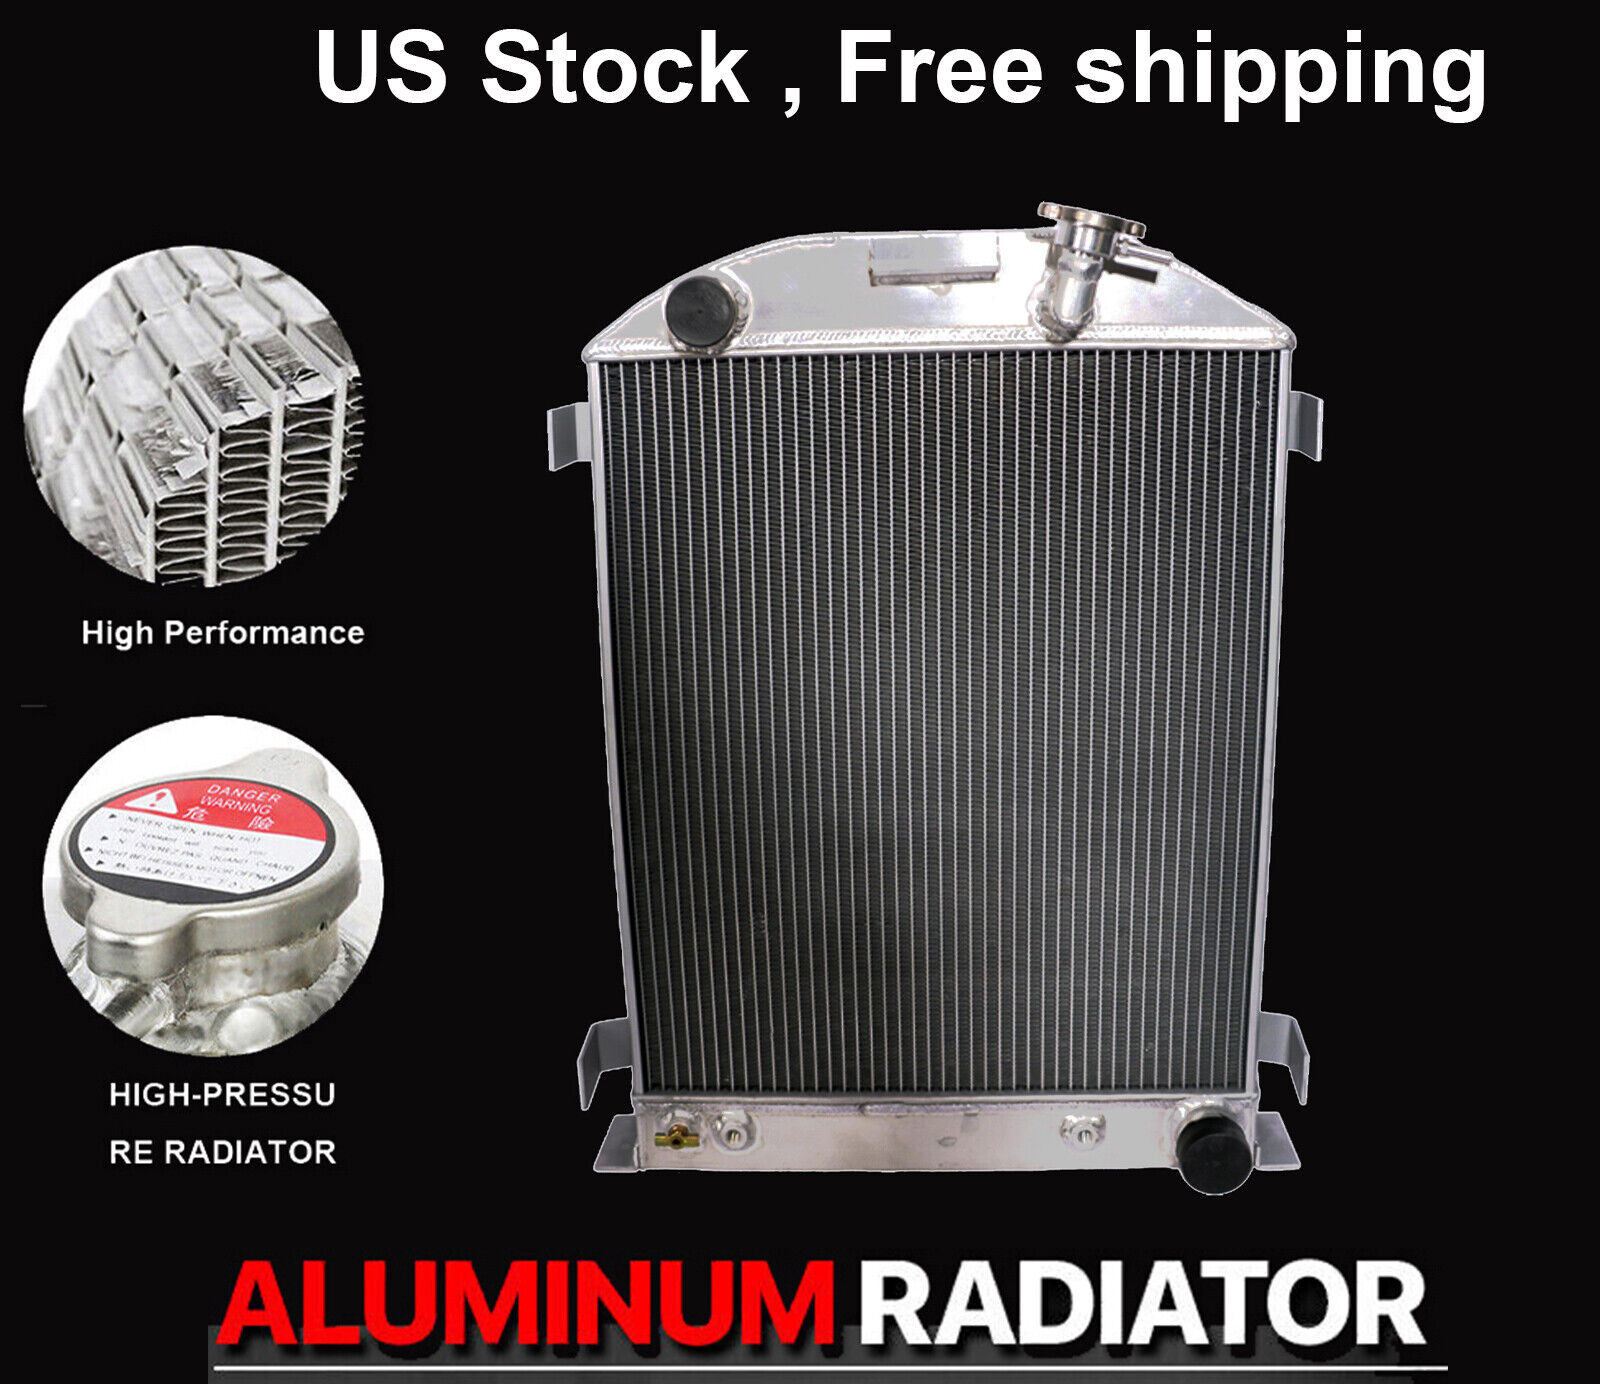 Aluminum Radiator for 1928-1936 Ford with Cooler (Chevy V8 Swap) 3ROWS